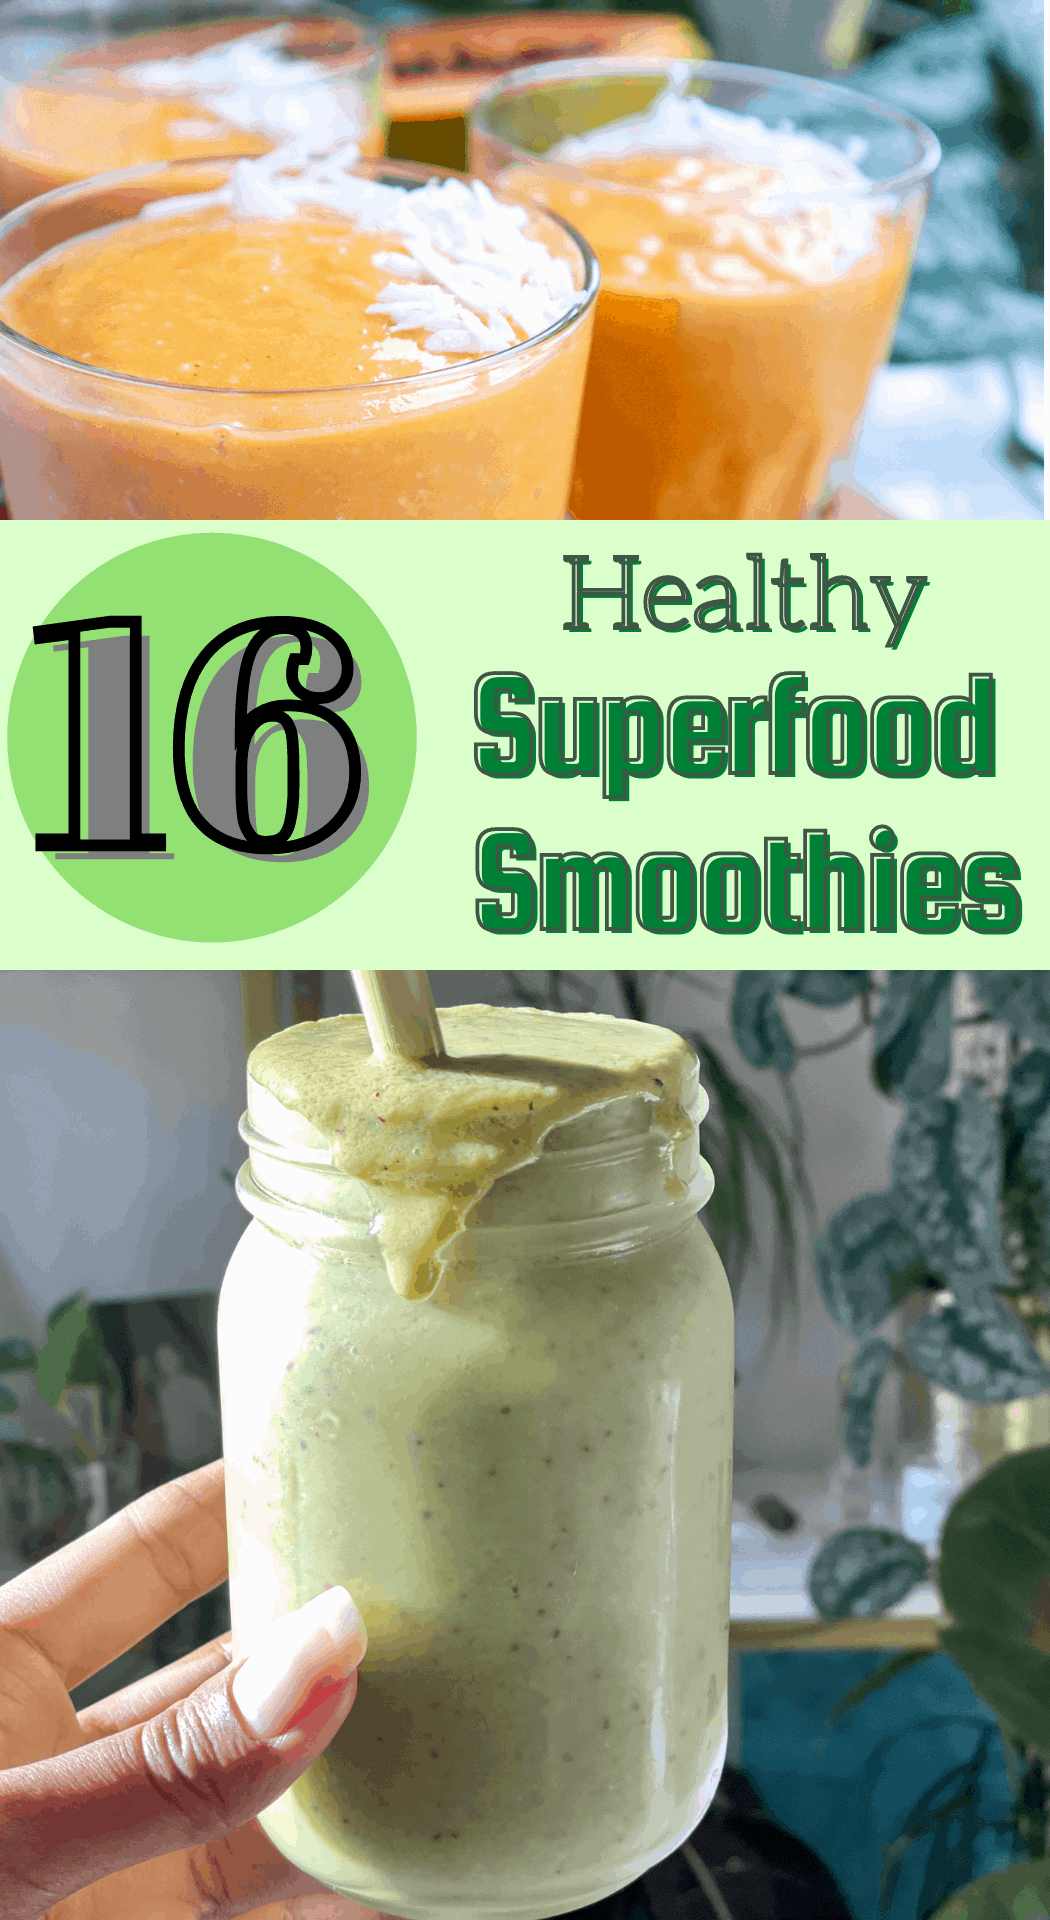 16 Healthy Superfood Smoothies to Jumpstart Your Day!